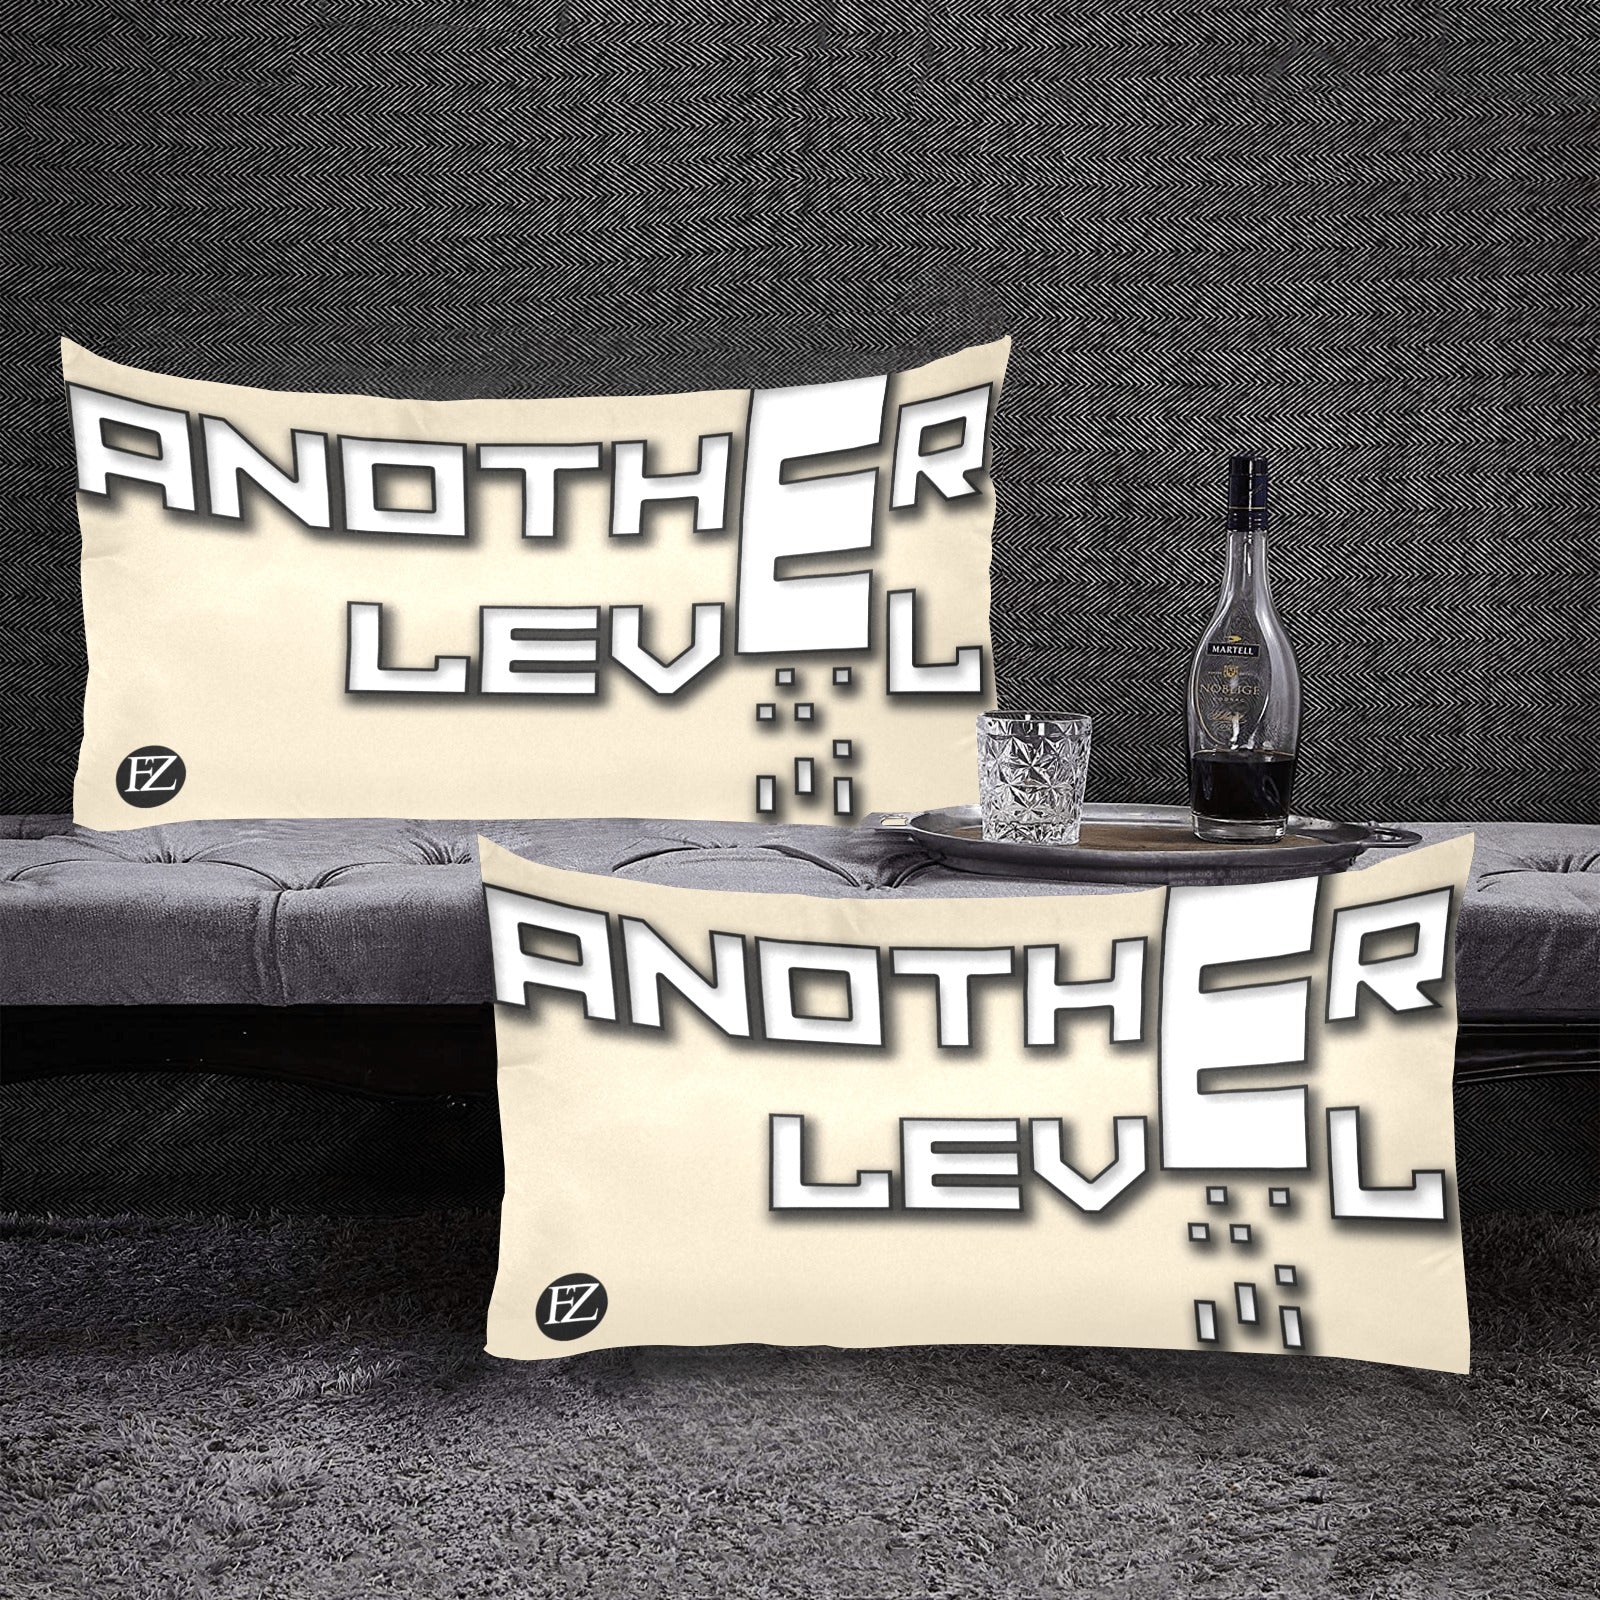 fz levels pillow case one size / fz levels pillow case - creme rectangle pillow cases 20"x36"(one side)(pack of 2)